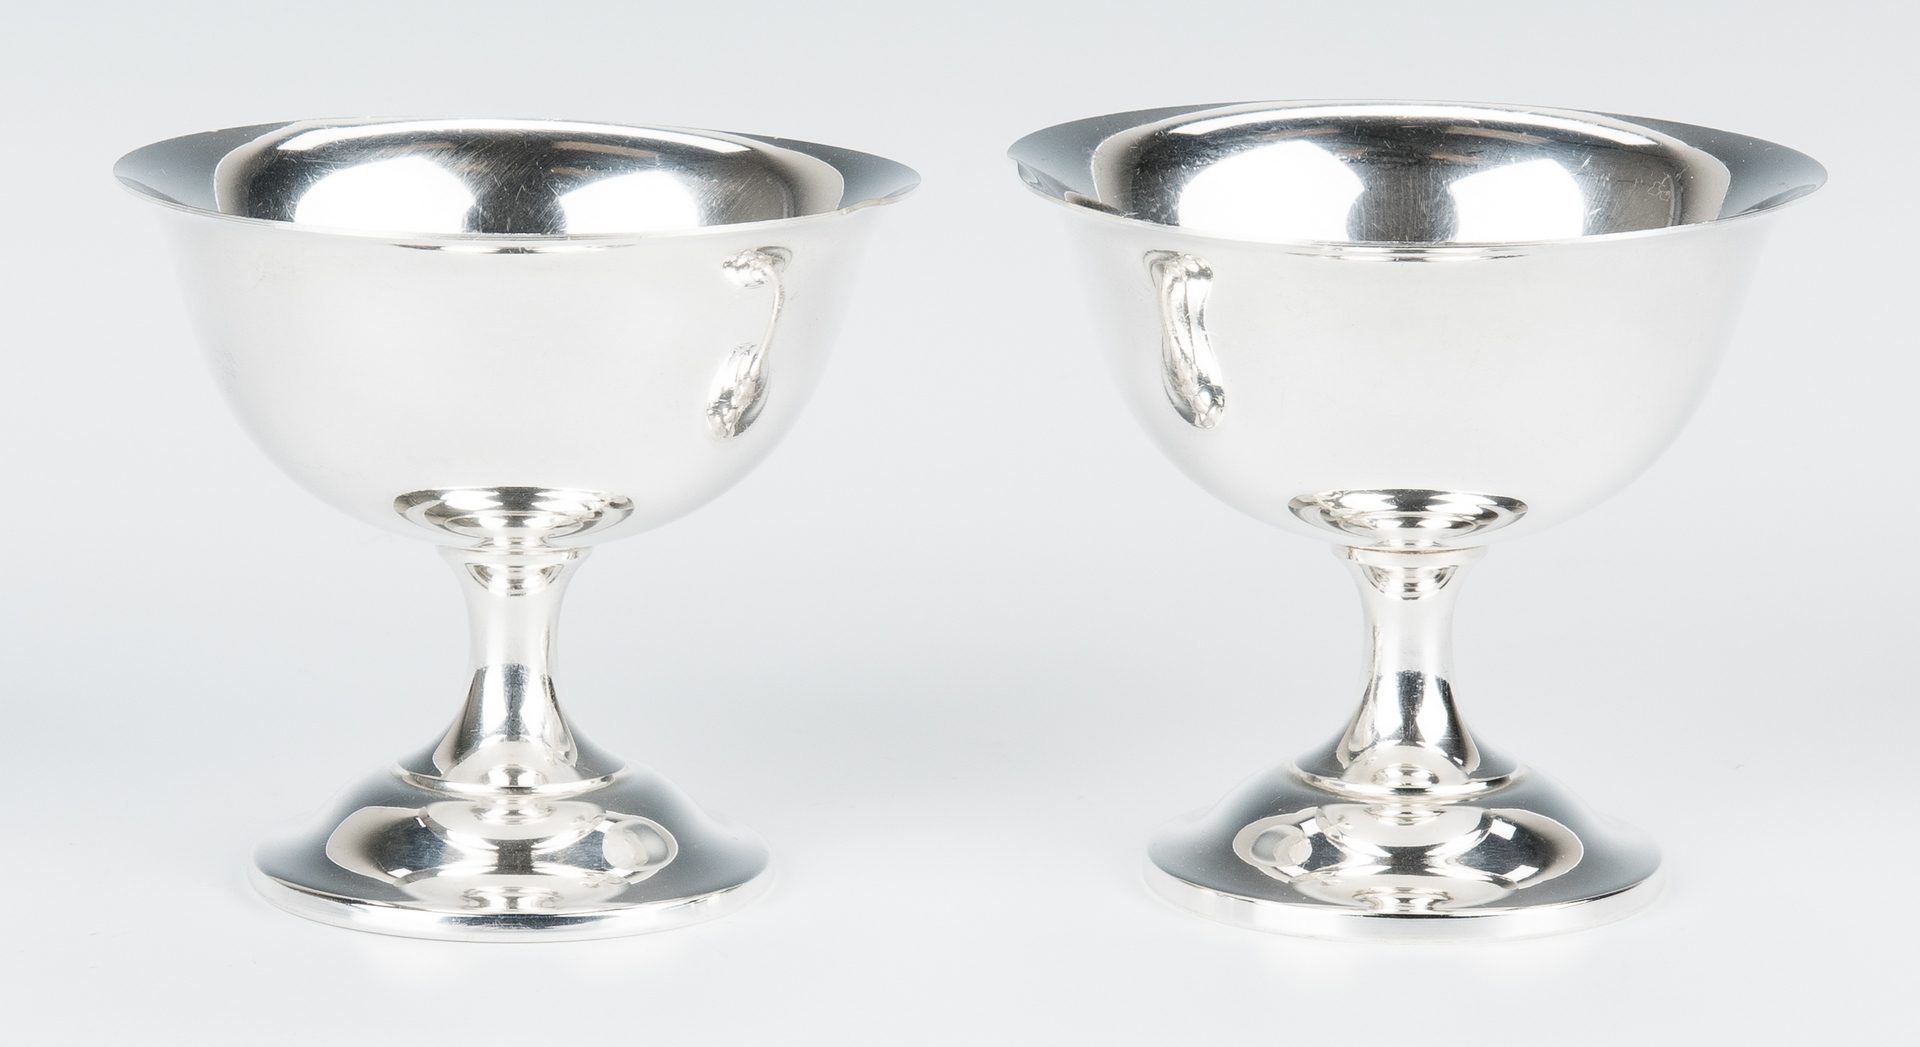 Lot 705: 12 Wallace Sterling Silver Sherbets